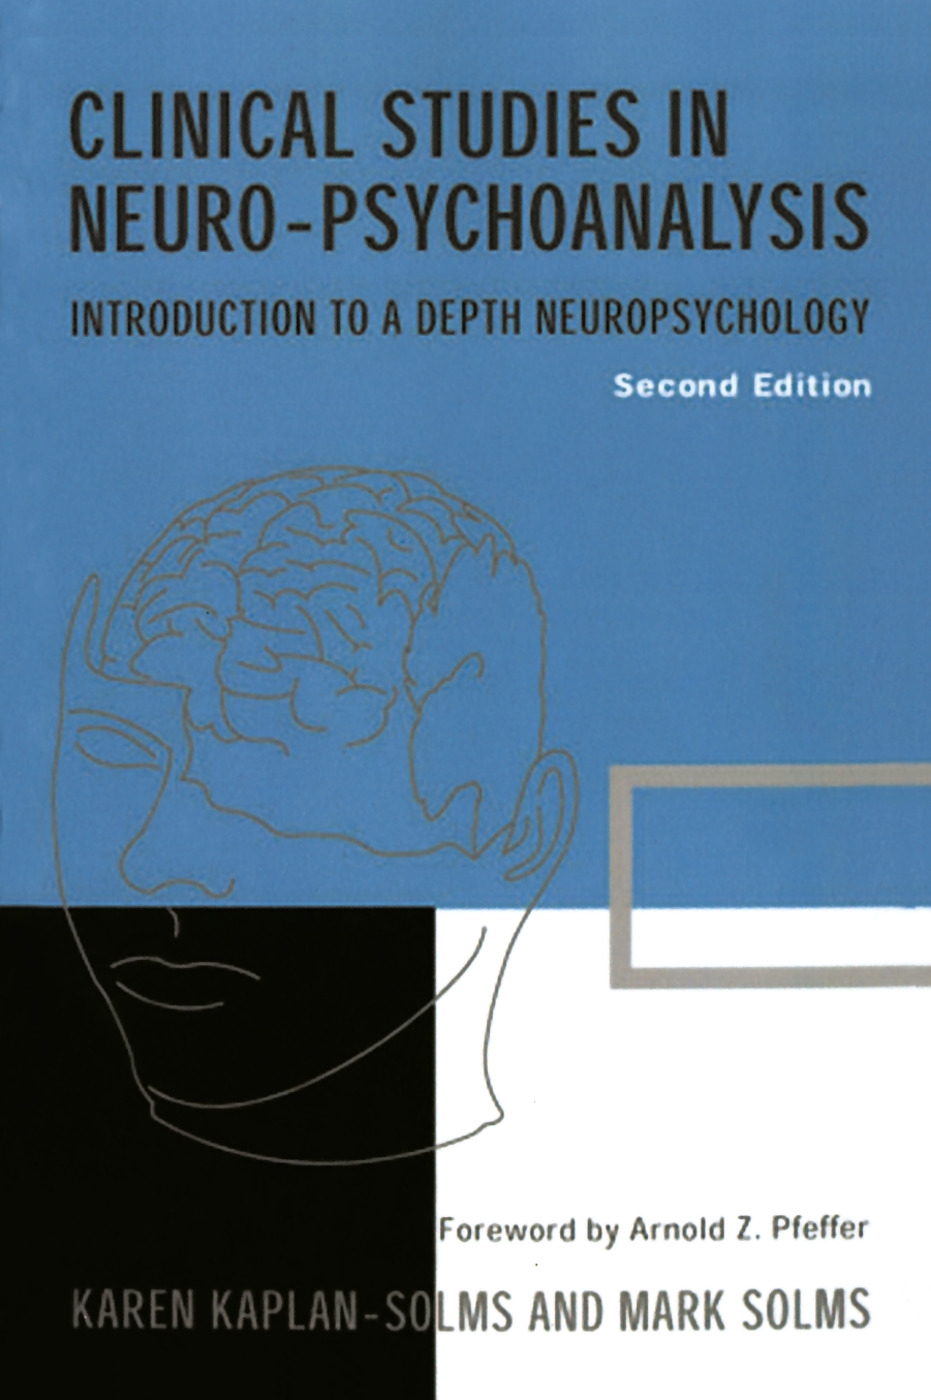 Clinical Studies in Neuro-psychoanalysis: Introduction to a Depth Neuropsychology